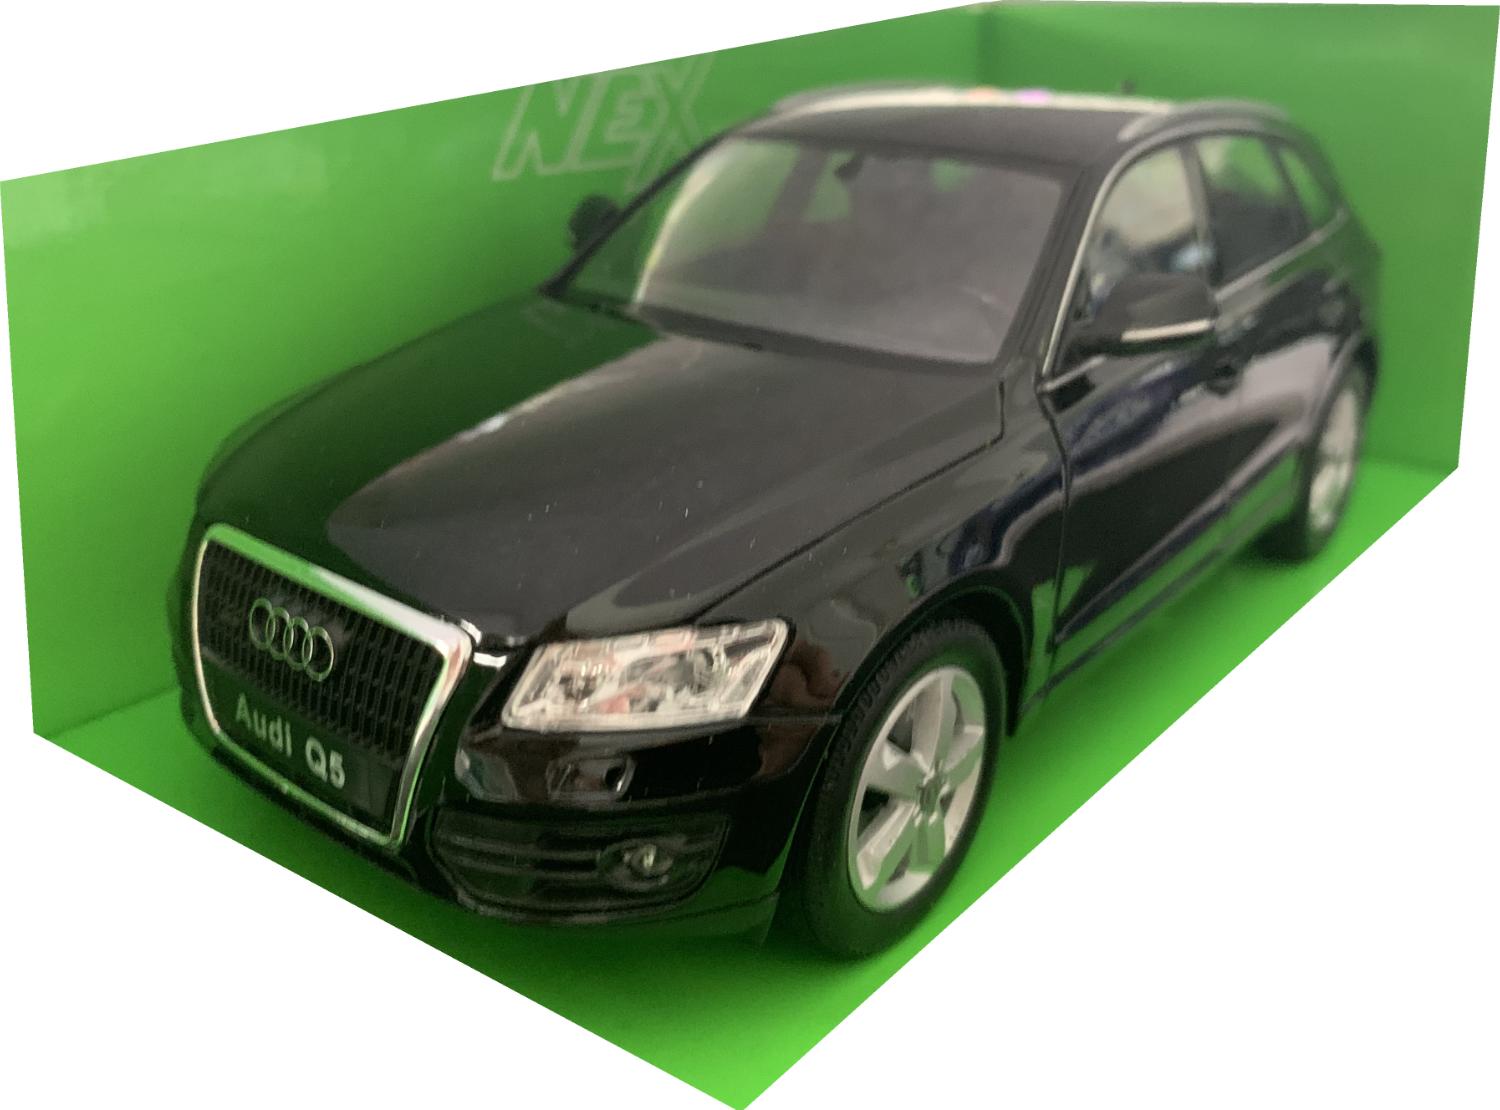 Audi Q5 3.2 Quartto in black 1:24 scale model from Welly